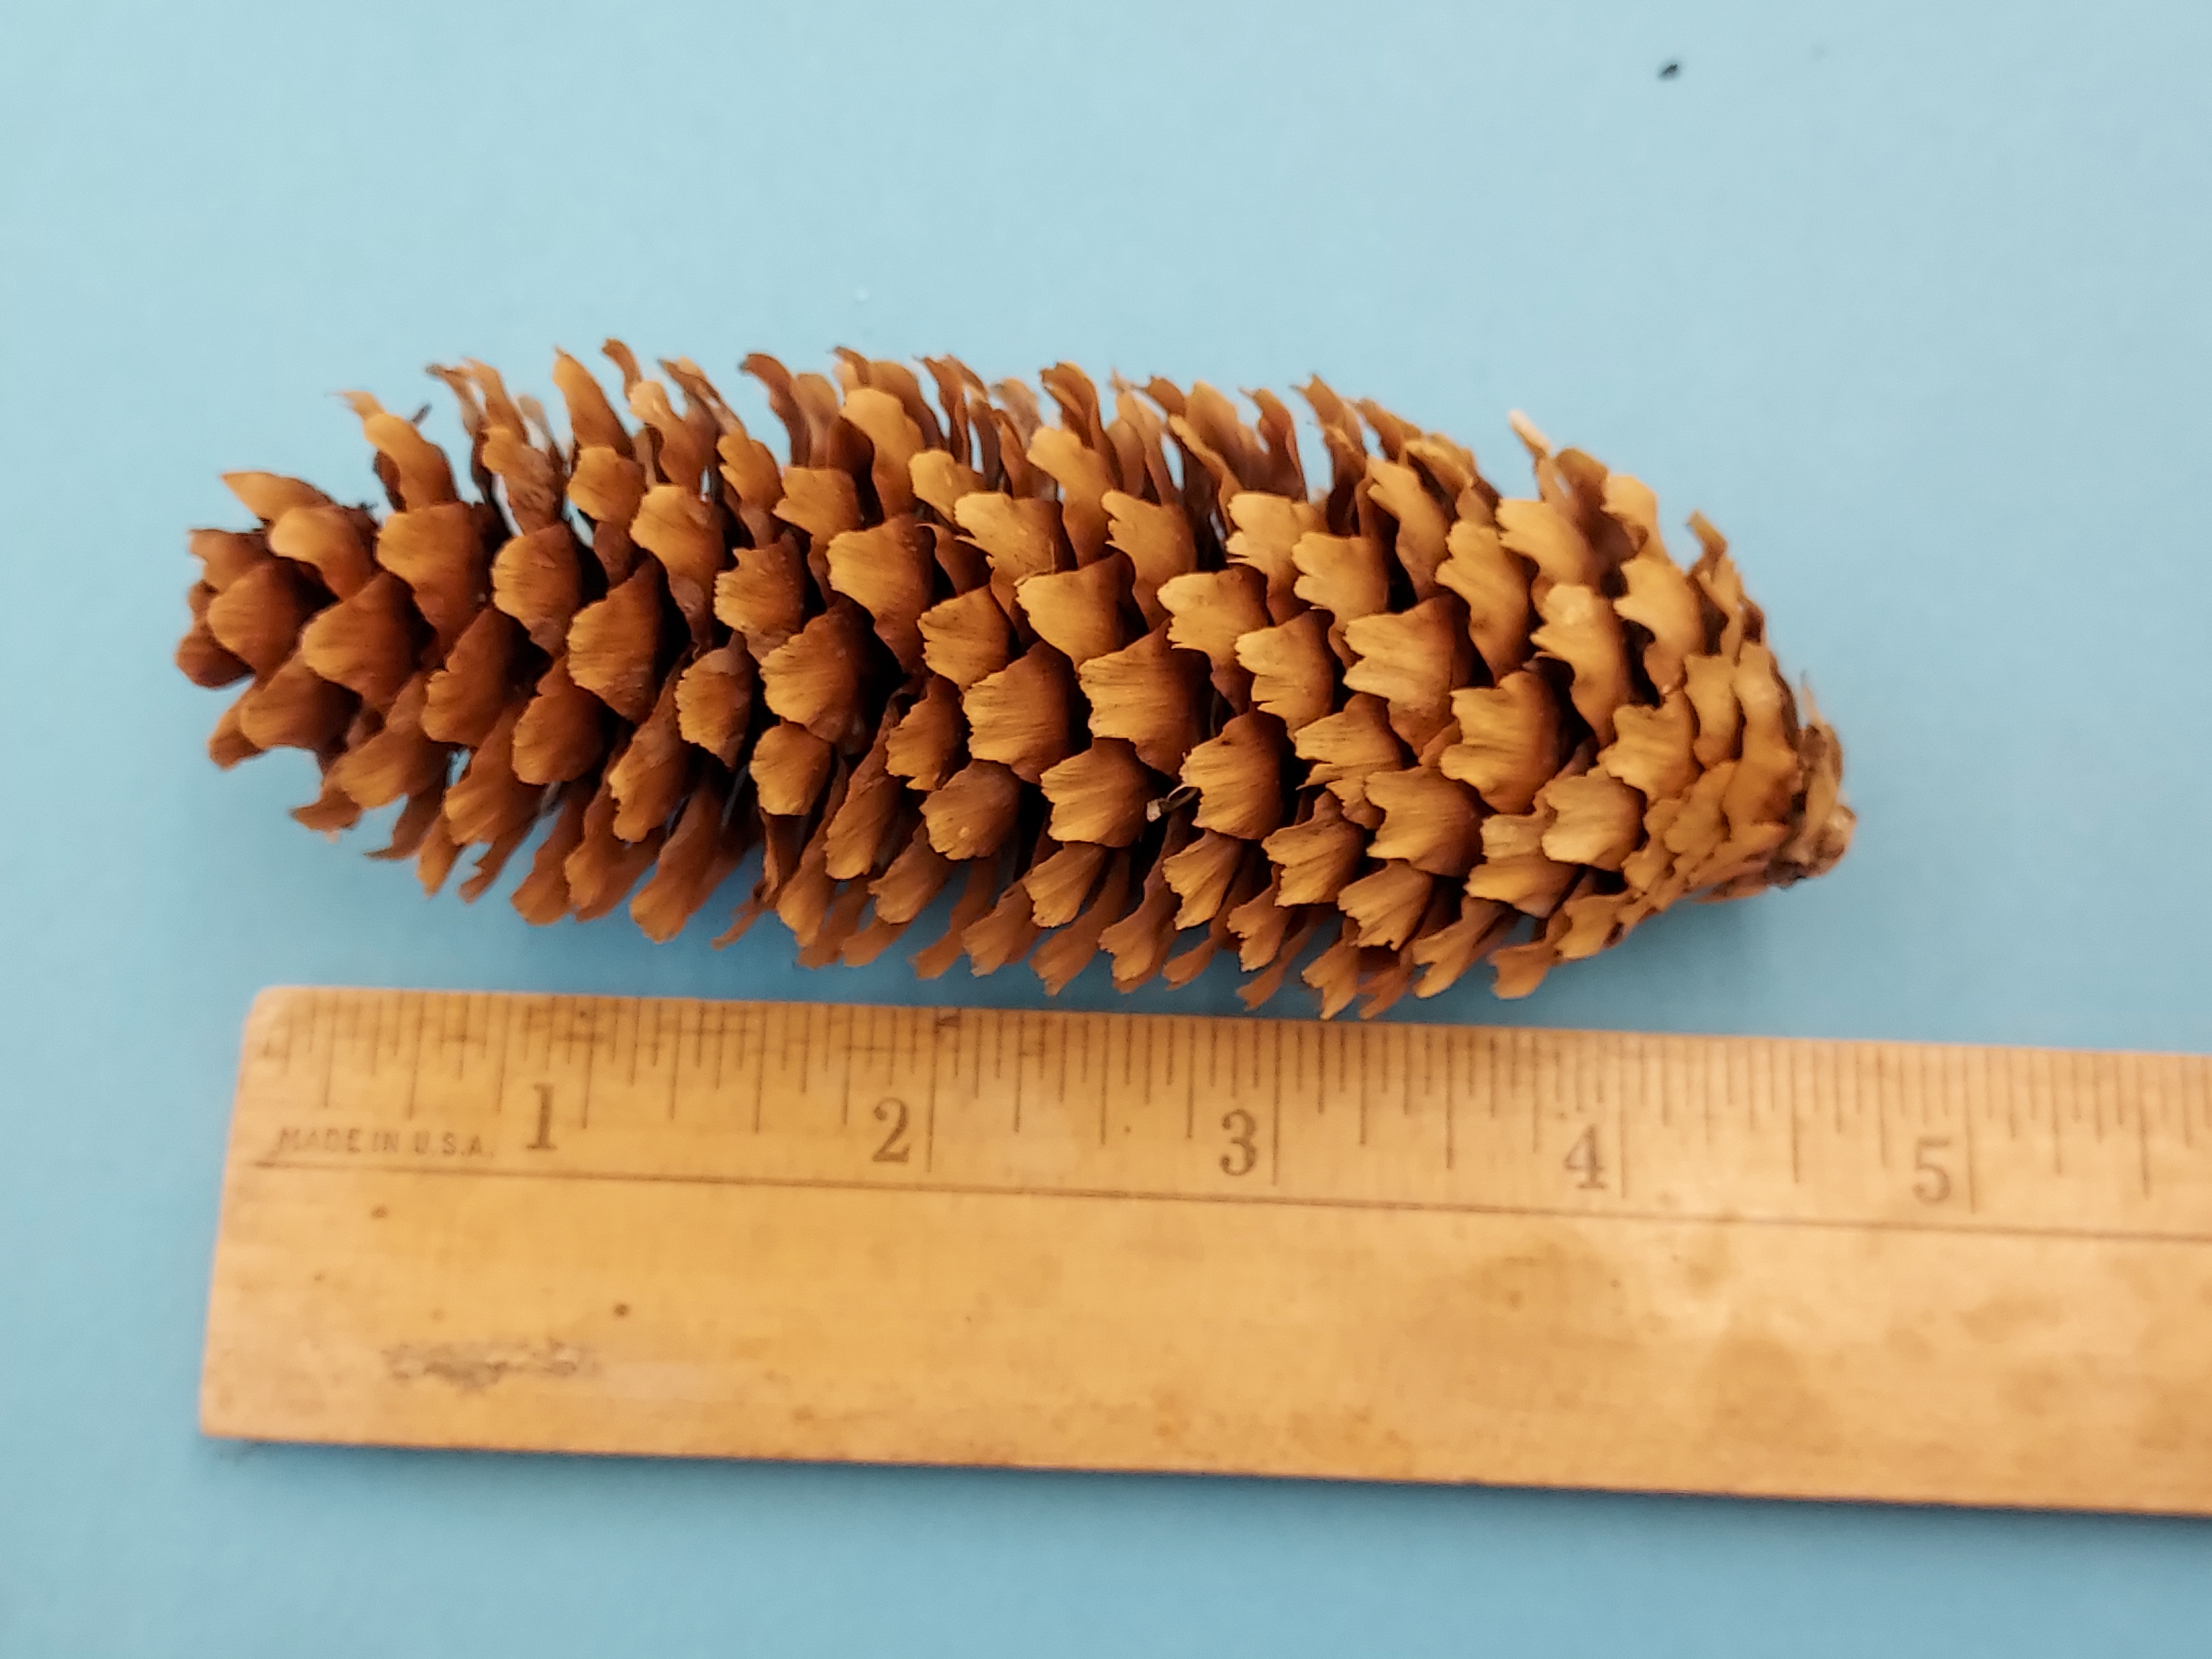 This photo shows a Colorado spruce cone next to a ruler with over four inches in length. 